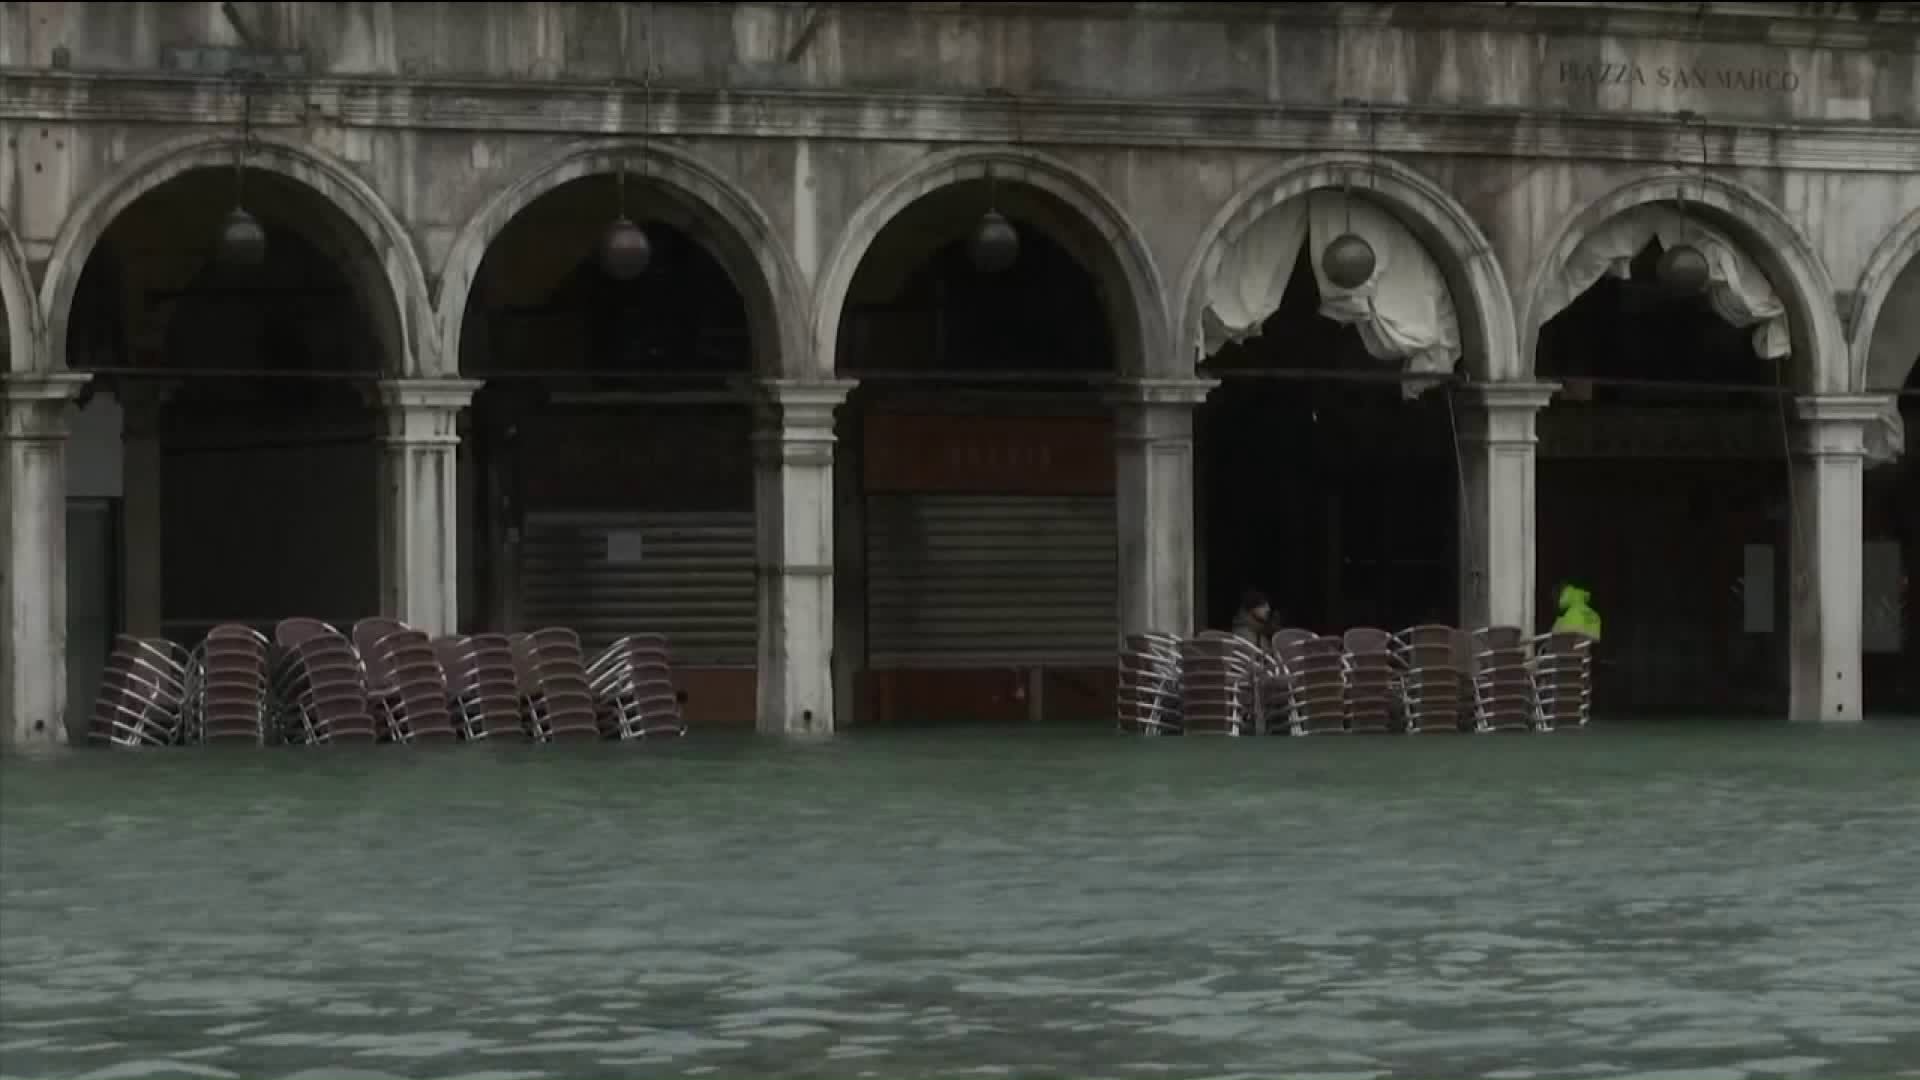 Venice is flooding  what lies ahead for its cultural and historical sites?